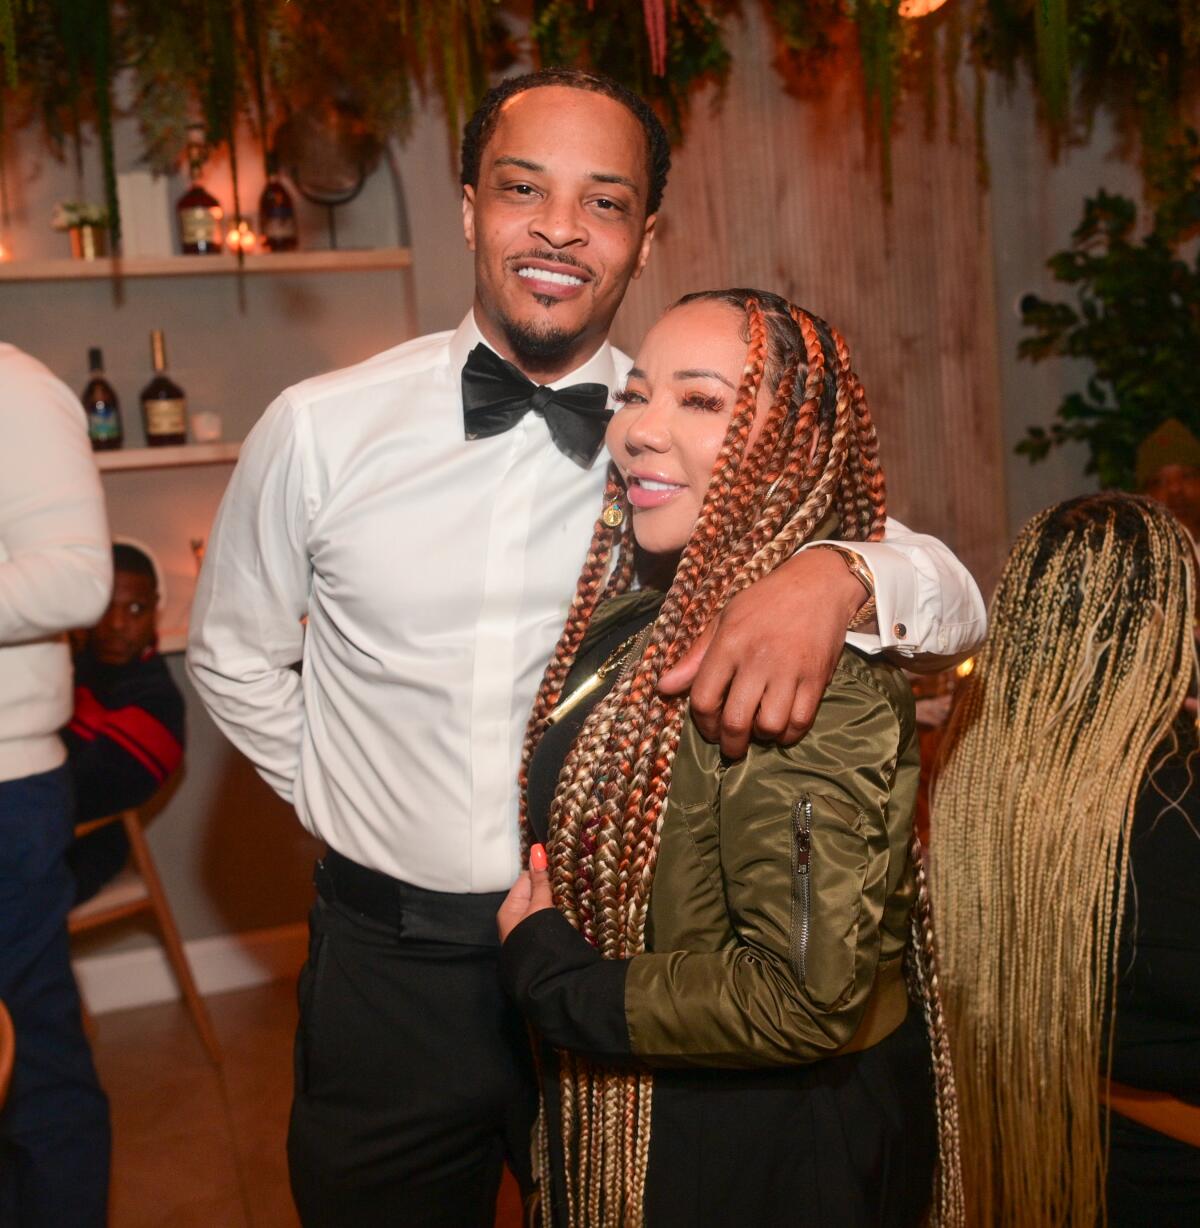 Tip "T.I." Harris in formalwear puts his arm around Tameka Harris who has long braids and a olive green bomber jacket